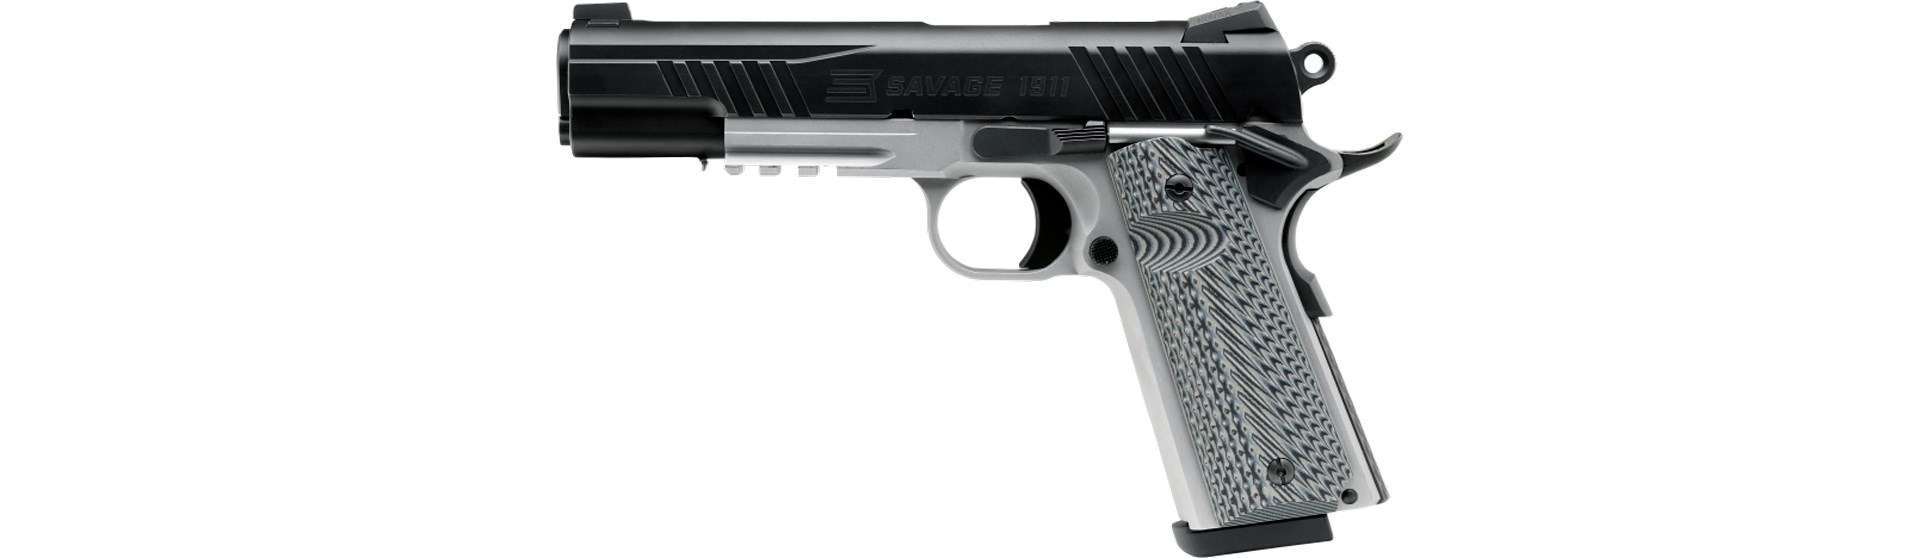 savage arms 1911 pistol left-side view on white two-tone gun .45 acp black and silver